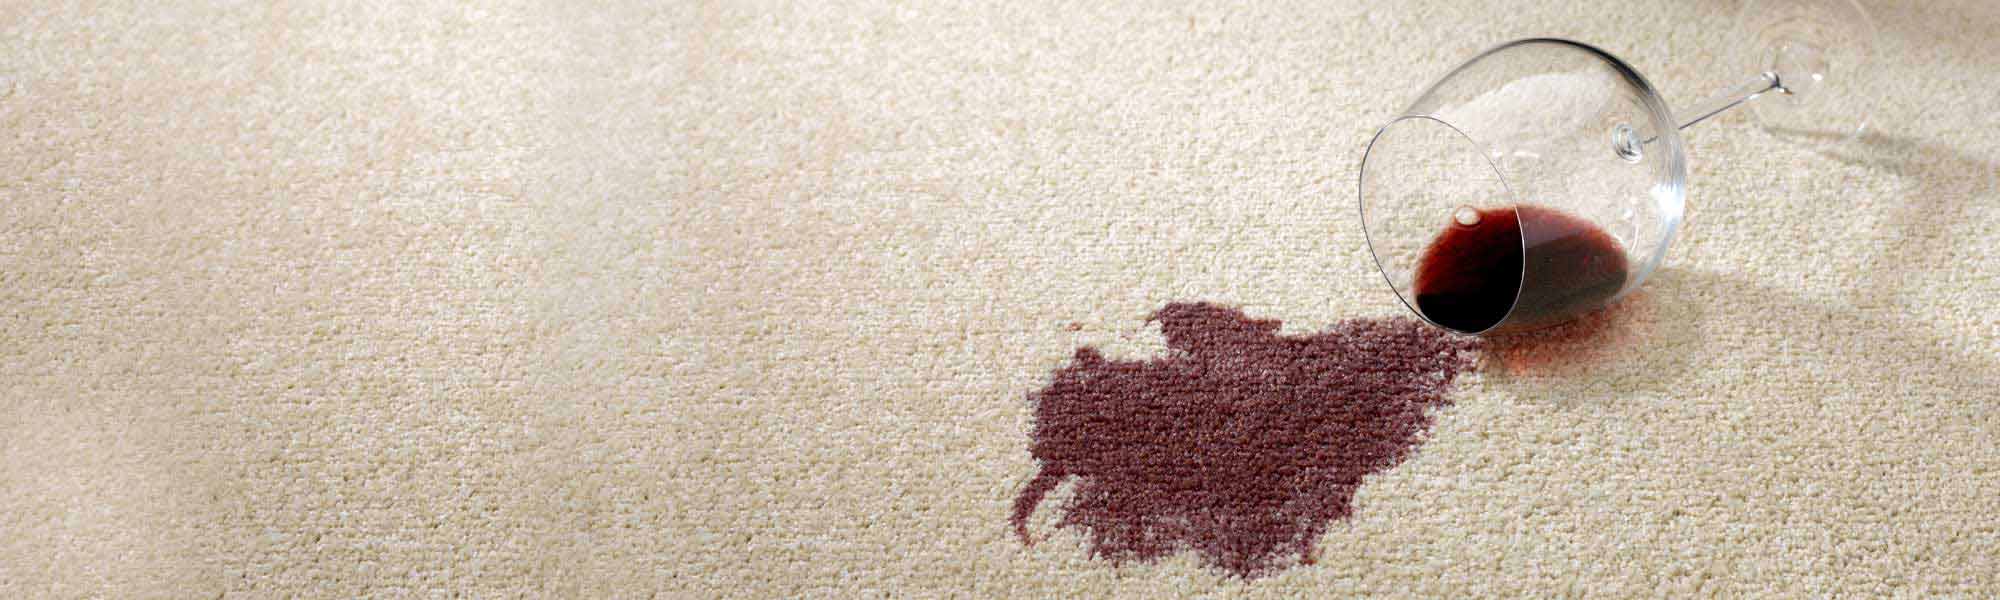 Professional Stain Removal Service by Hampton's Chem-Dry in Hannibal & Quincy